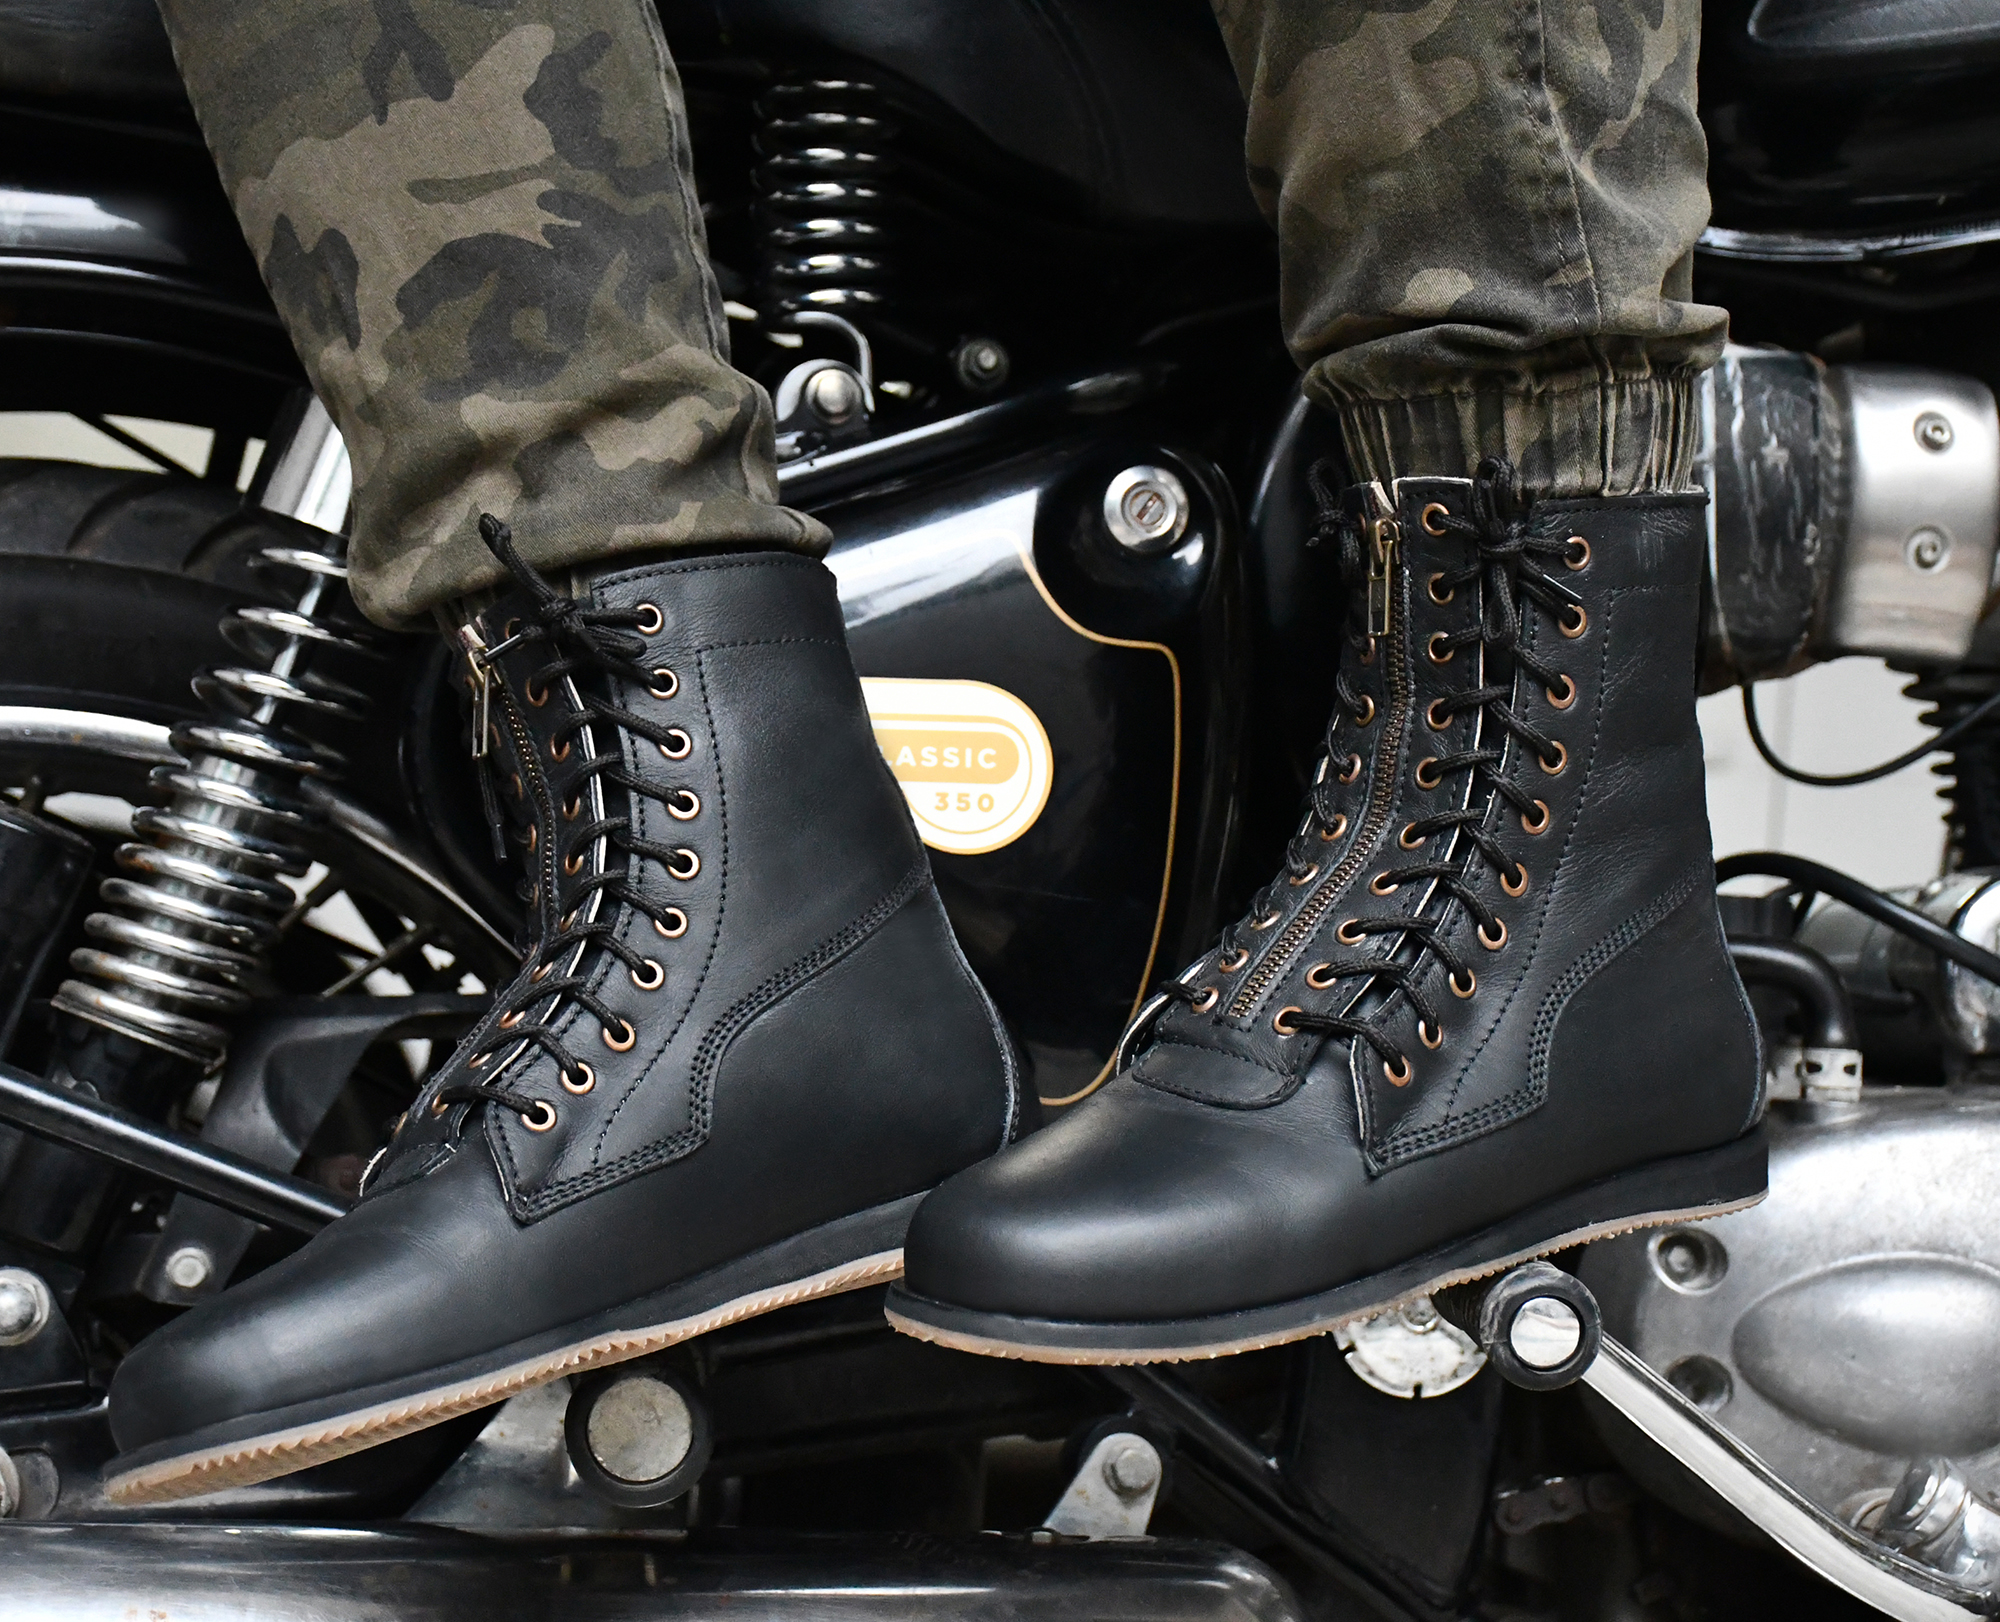 Biker Boots : Urban Boots for Bikers with heavy duty Rubber Sole by ASM. Article : Biker610-Black